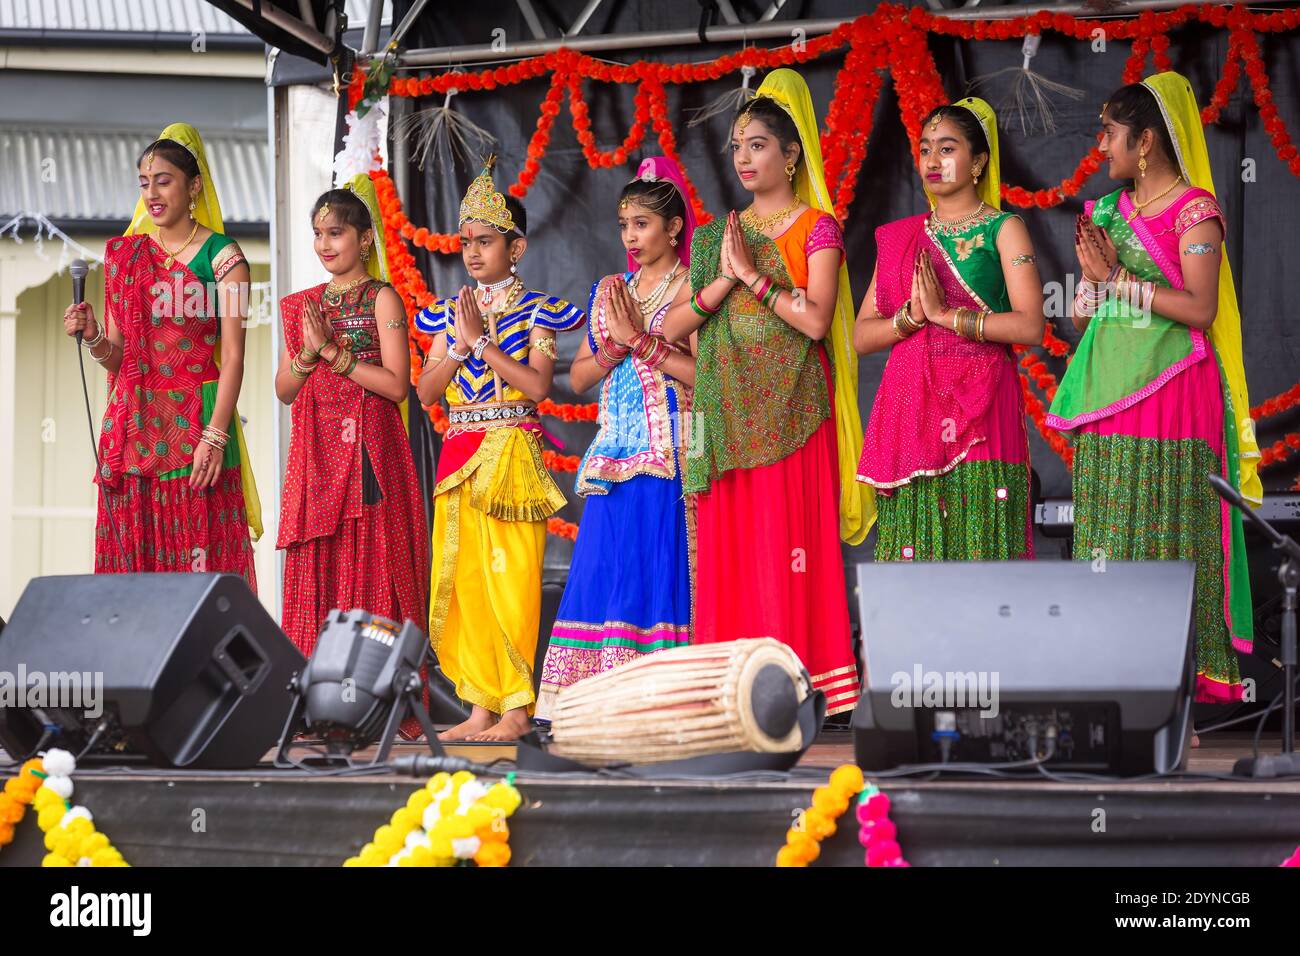 A row of Indian women in colorful saris making the namaste gesture. Photographed at Diwali festival celebrations Stock Photo